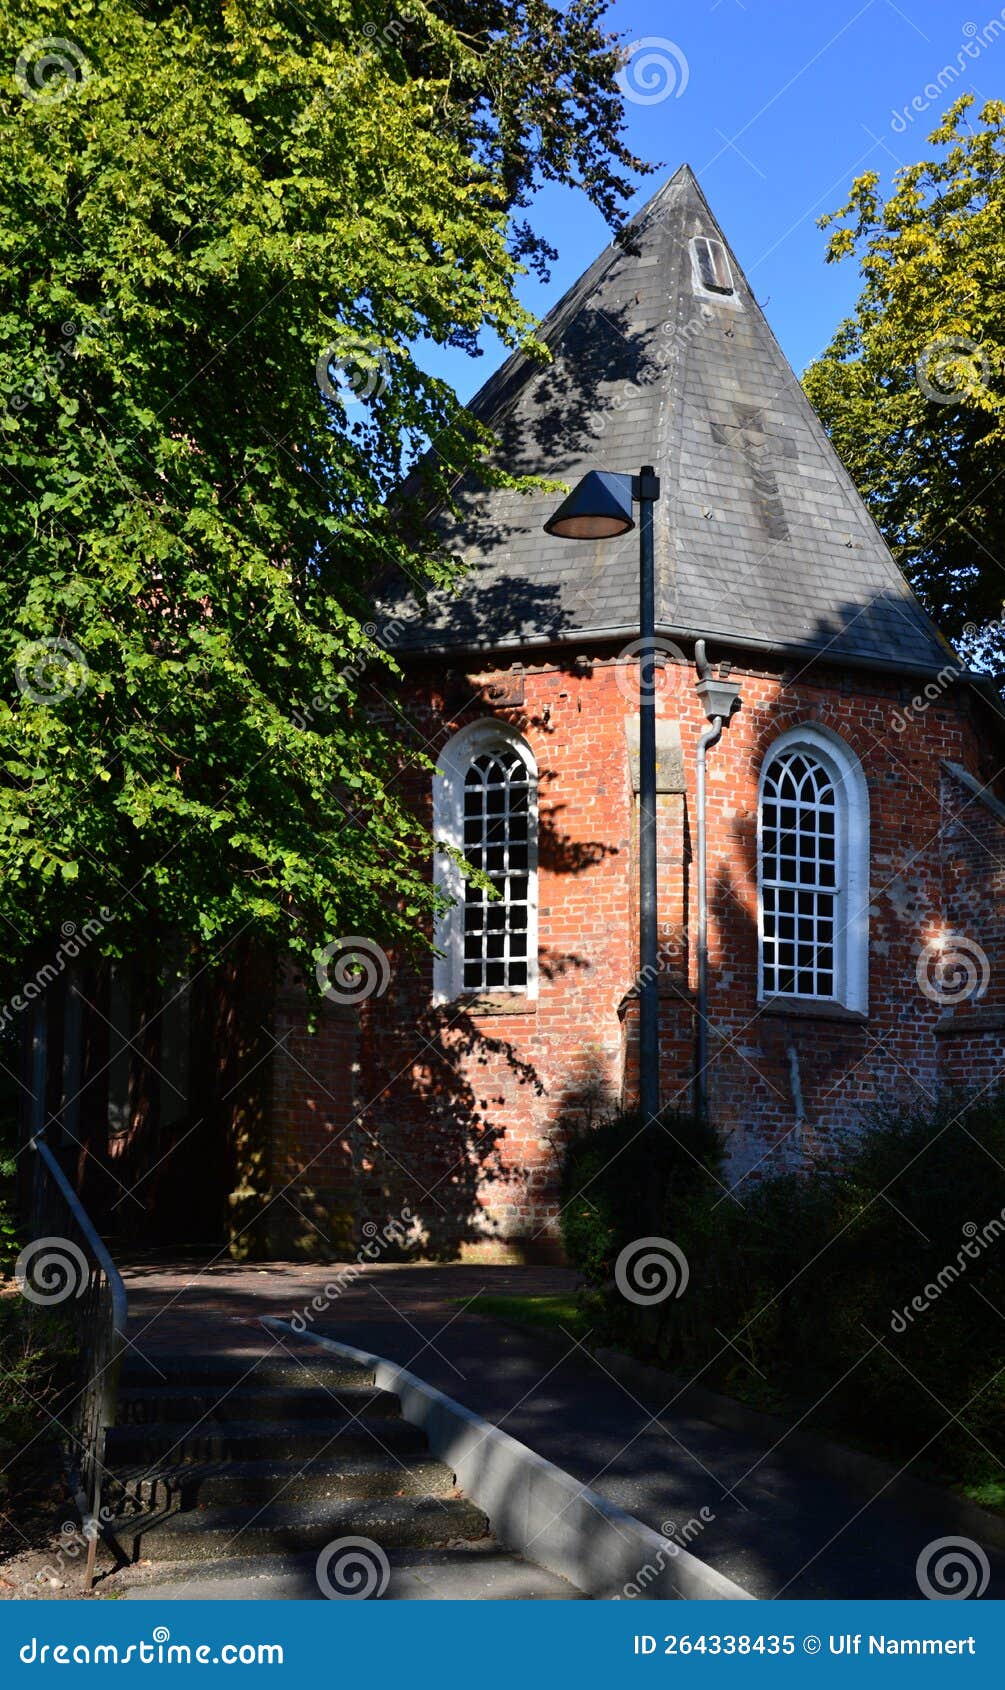 historical church in the town loga, leer, east frisia, lower saxony